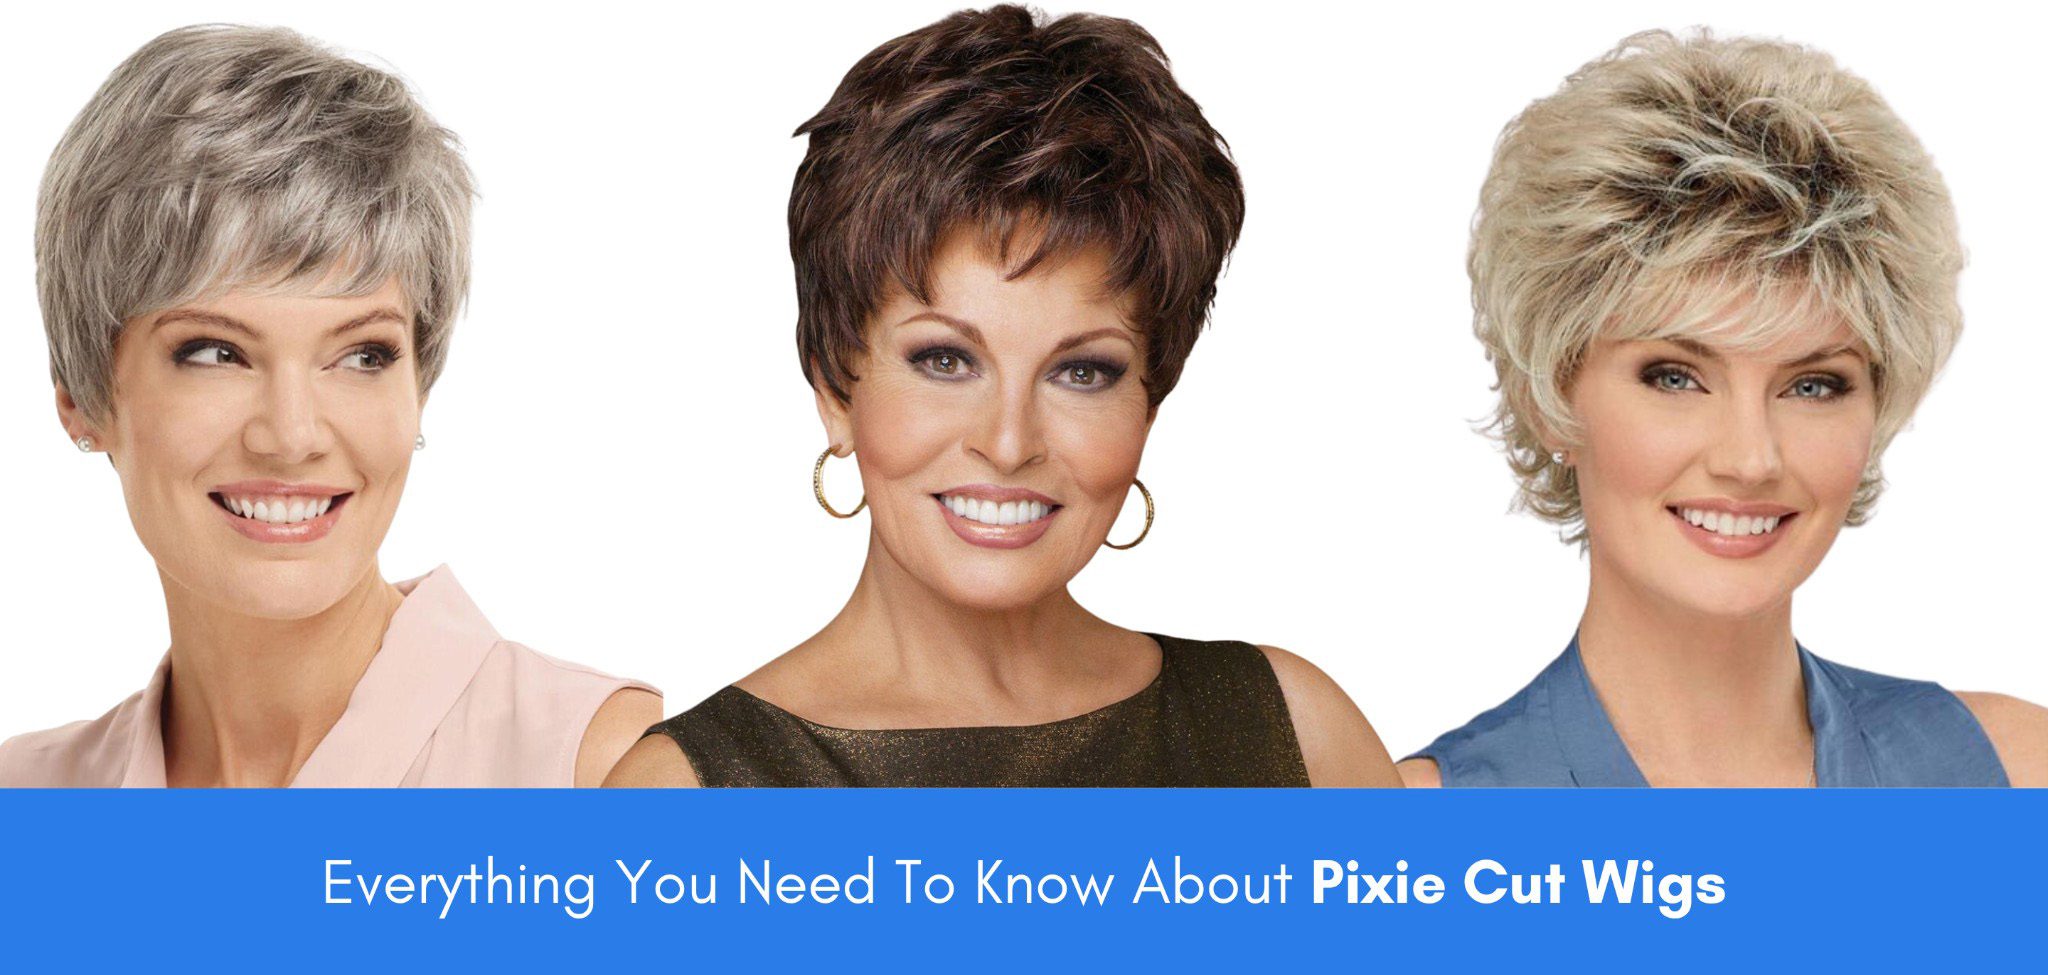 Everything You Need to Know About Pixie Cut Wigs